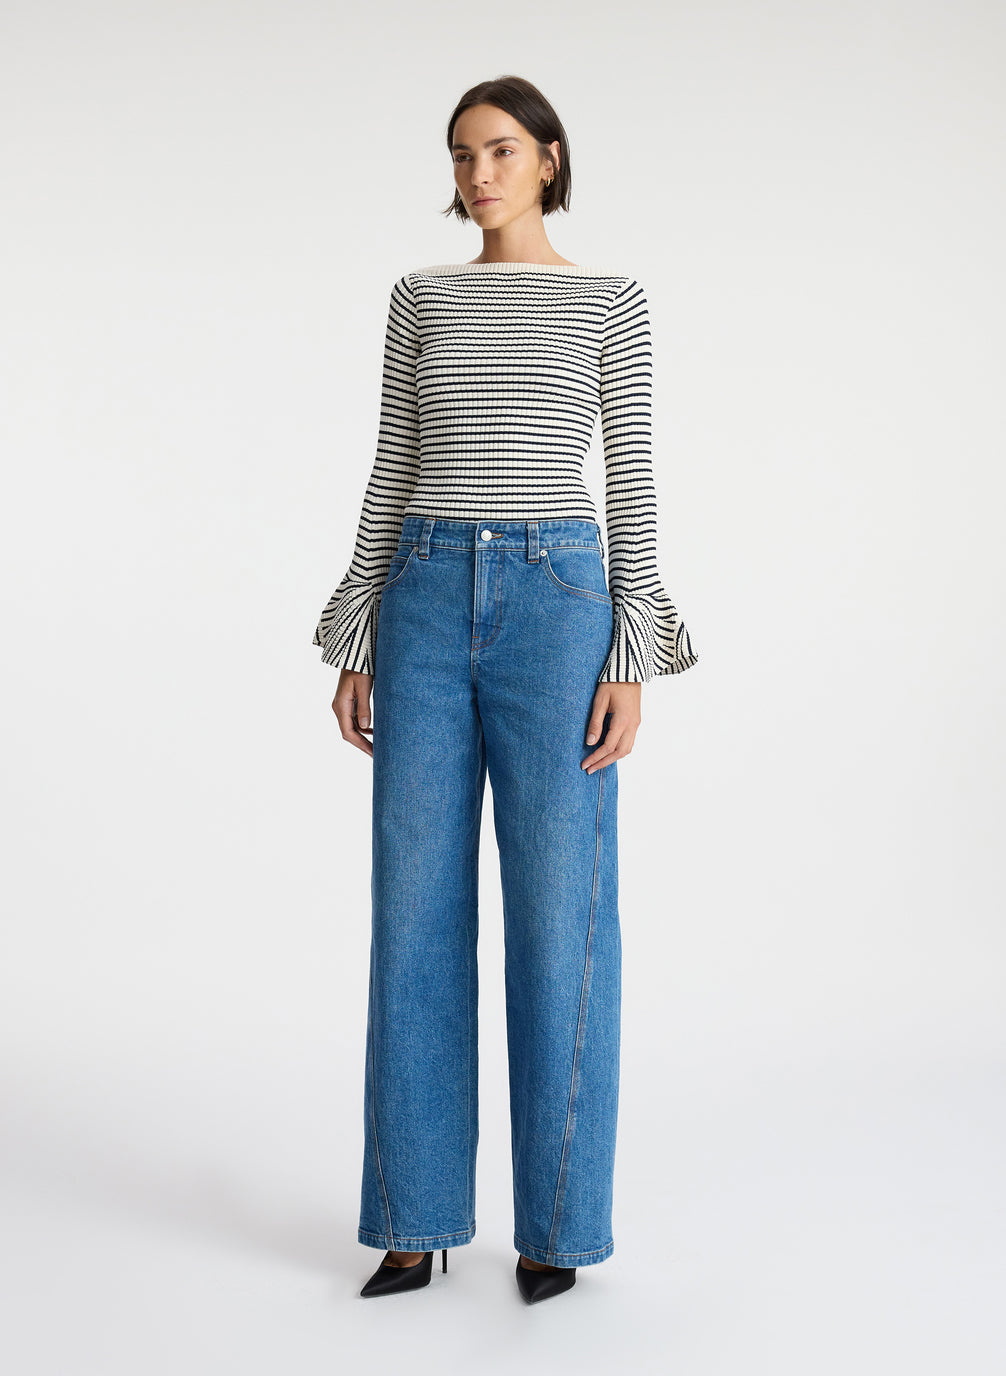 side view of woman wearing striped long bell sleeve knit top and medium blue wash denim jeans